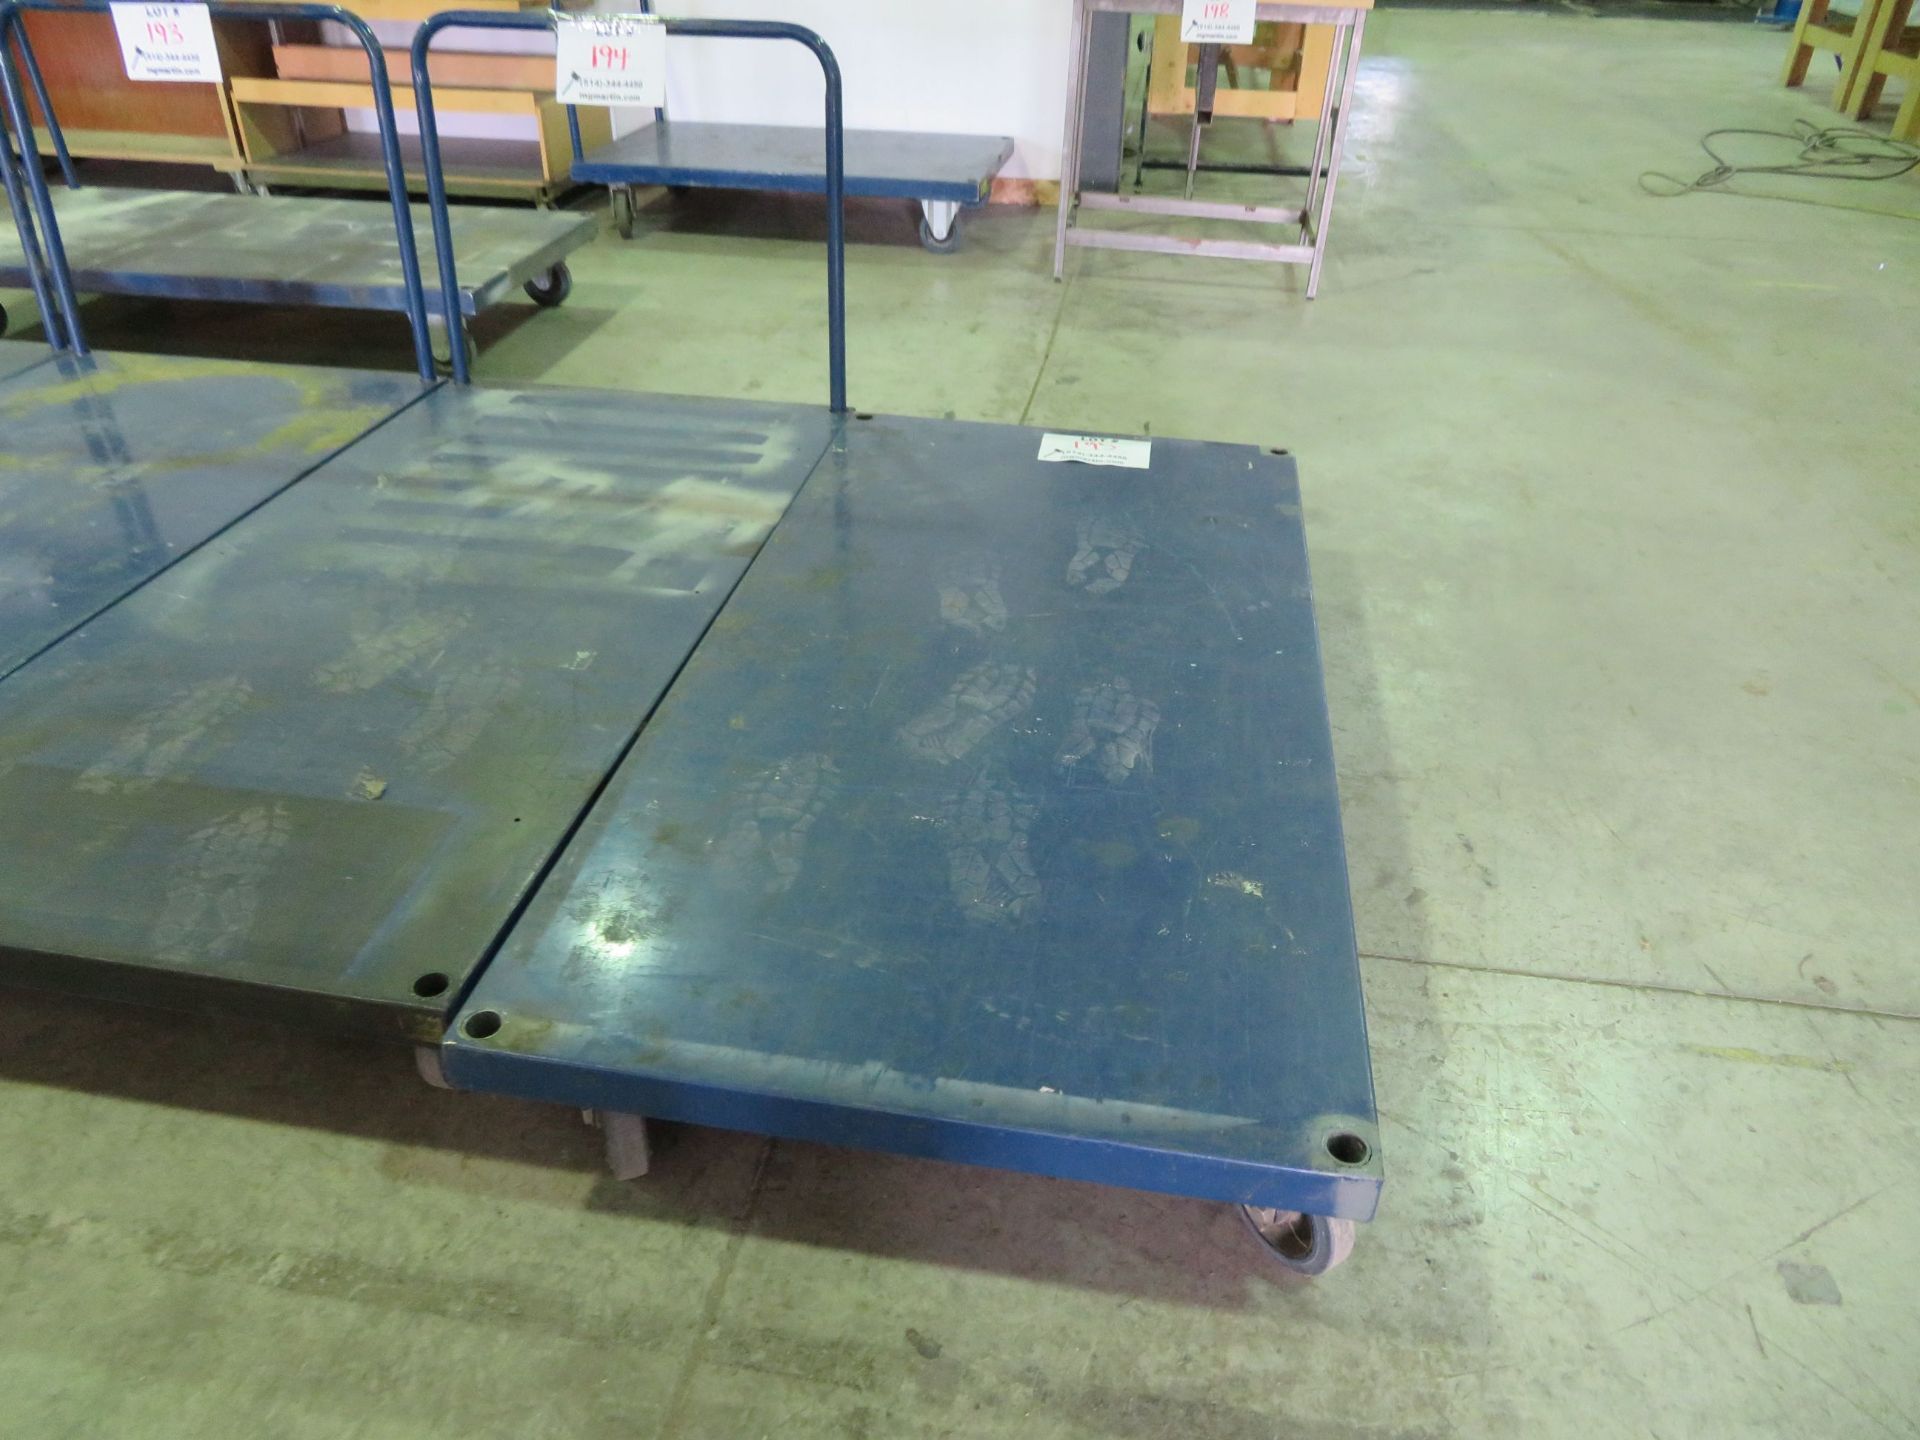 LOT including metal platform truck on wheels approx. 36"" x 72""- NO HANDLE